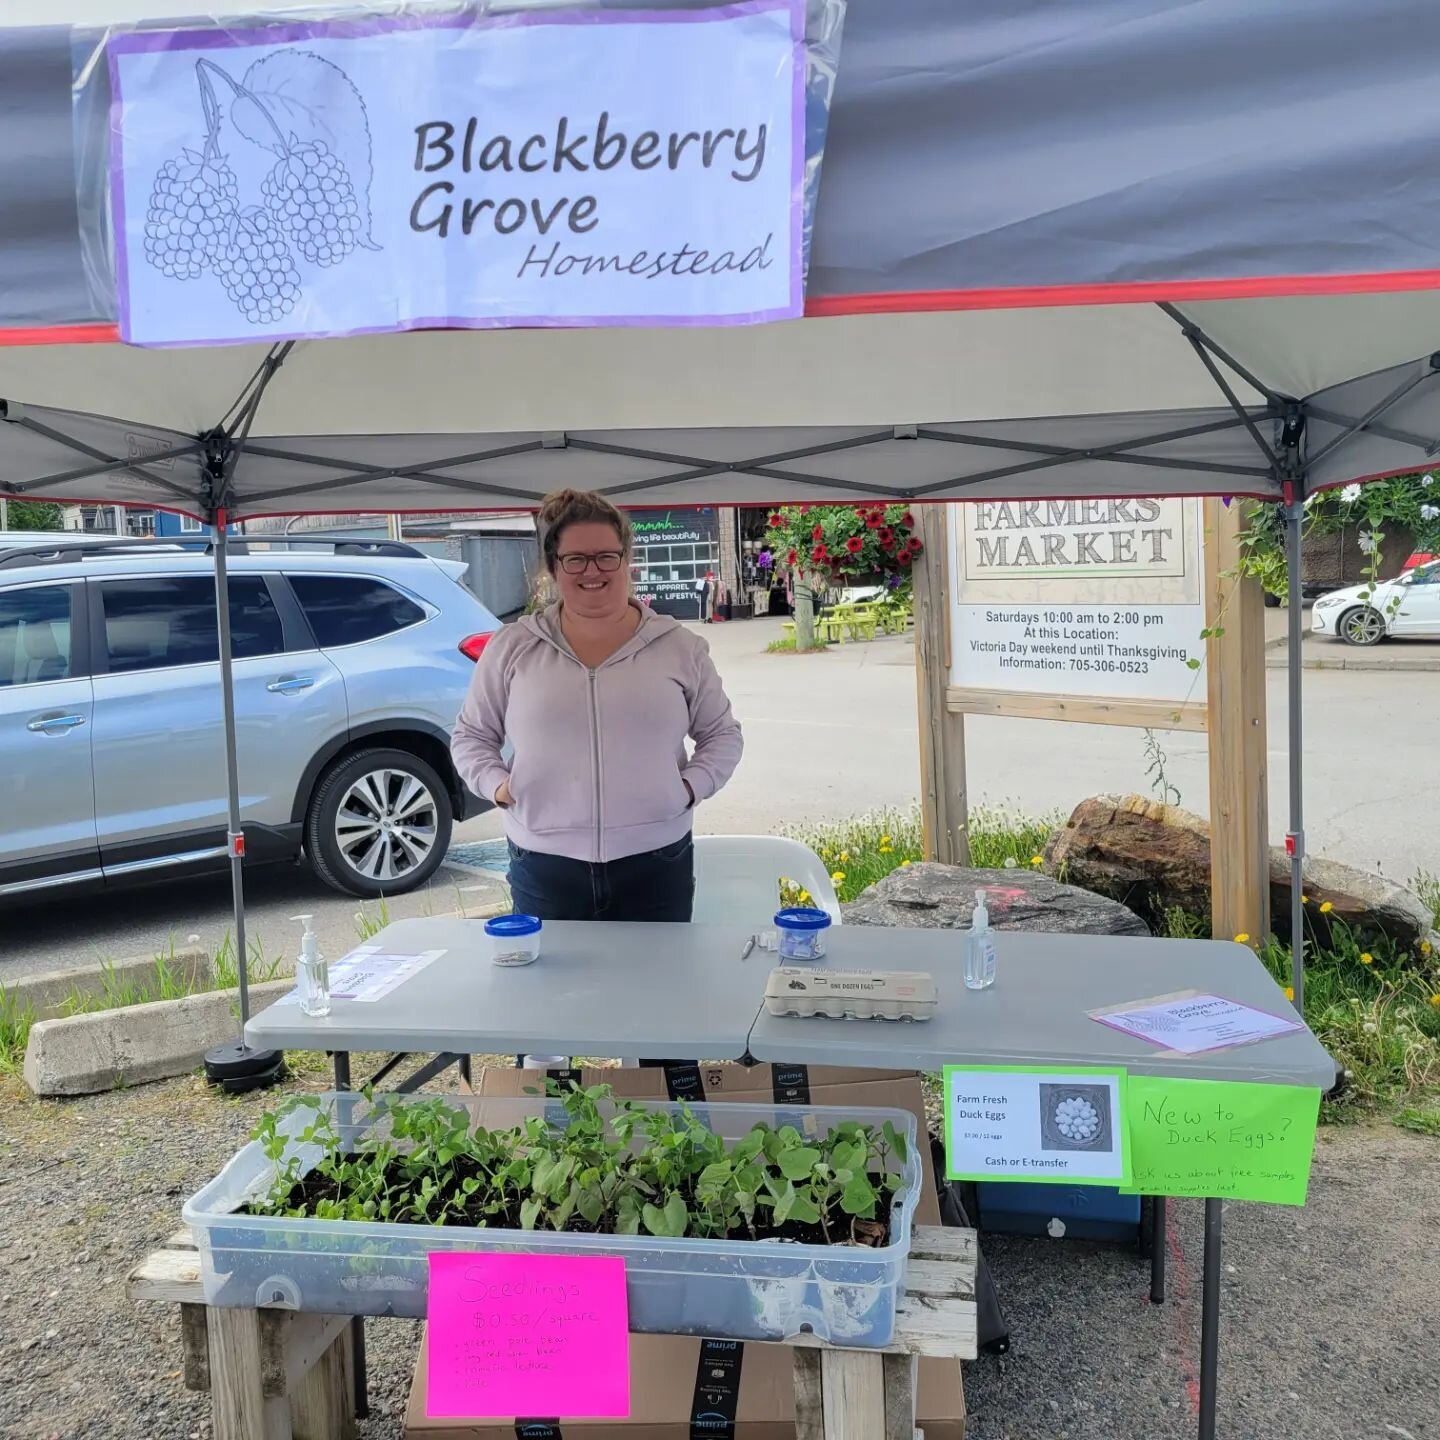 Come and check out Blackberry Grove Farms!! One of our very valued community agriculture vendors! They have duck eggs for $7 a dozen and some very reasonably priced plant starts!
.
.
.
#communityagriculture #duckeggs #quack #seedlings #myfarmersmarke